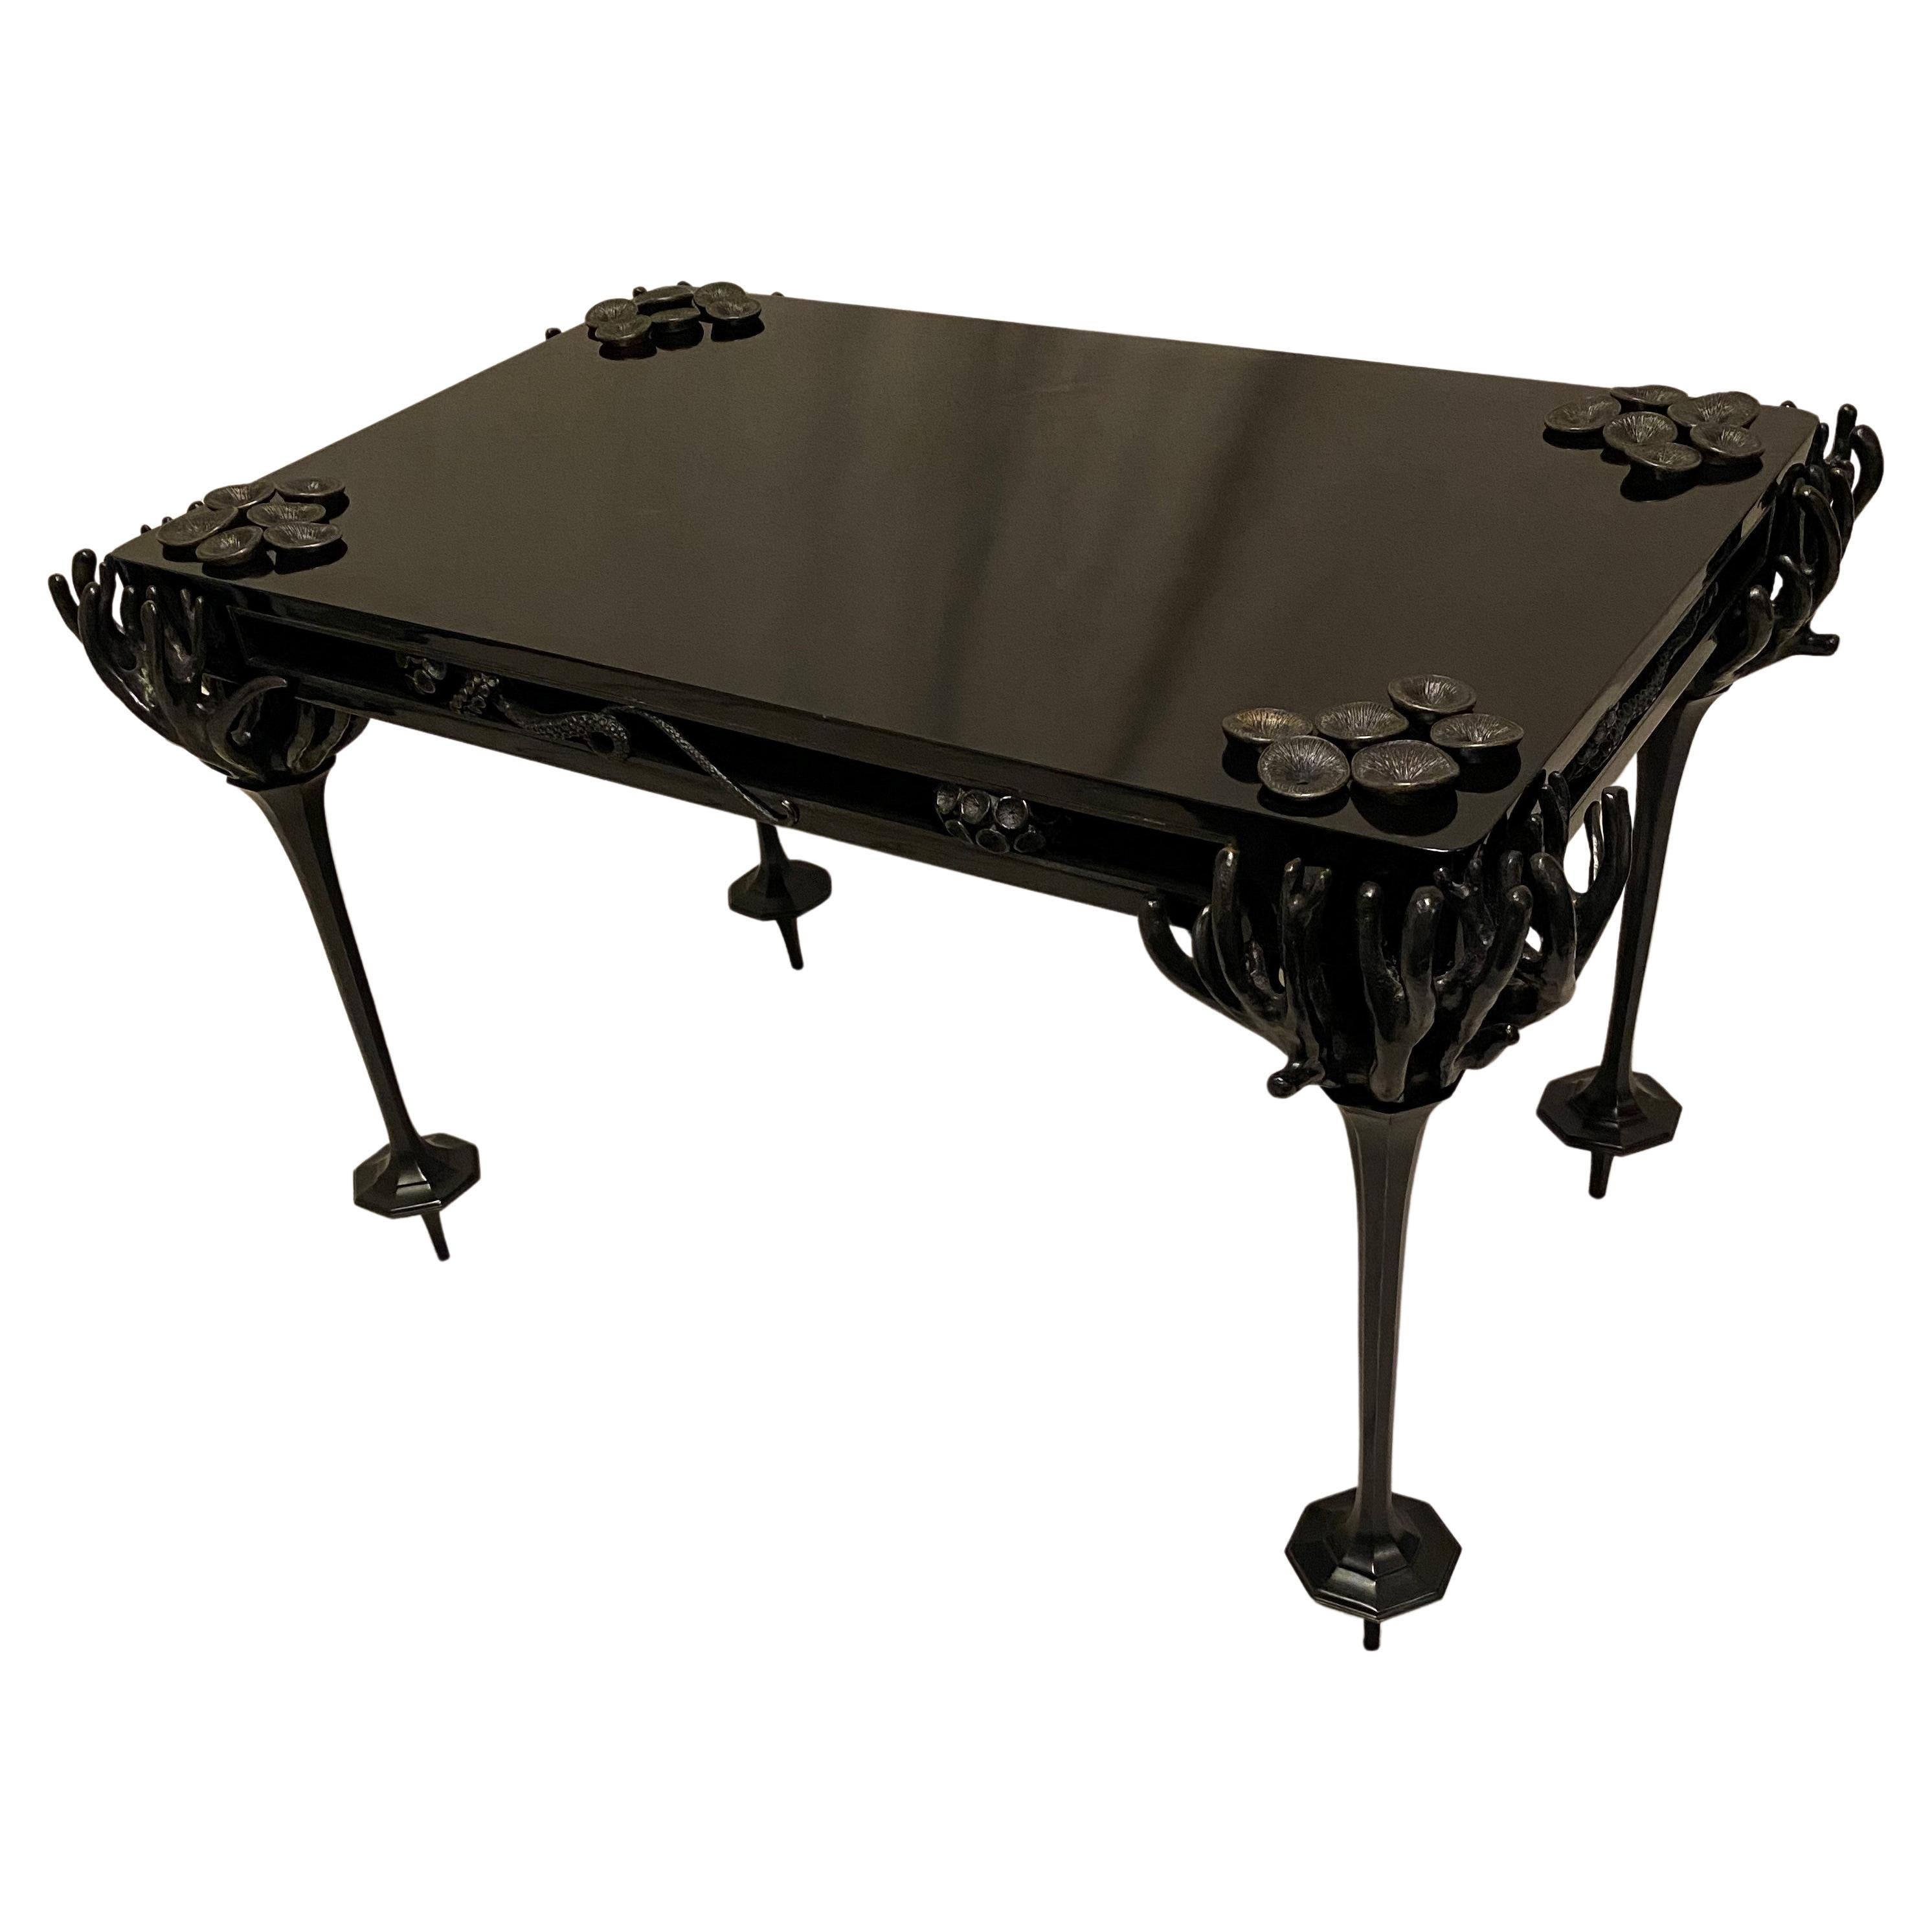 Blackened Bronze & Blue/Black Lacquered "Behepoda" Art Piece Cocktail Table For Sale